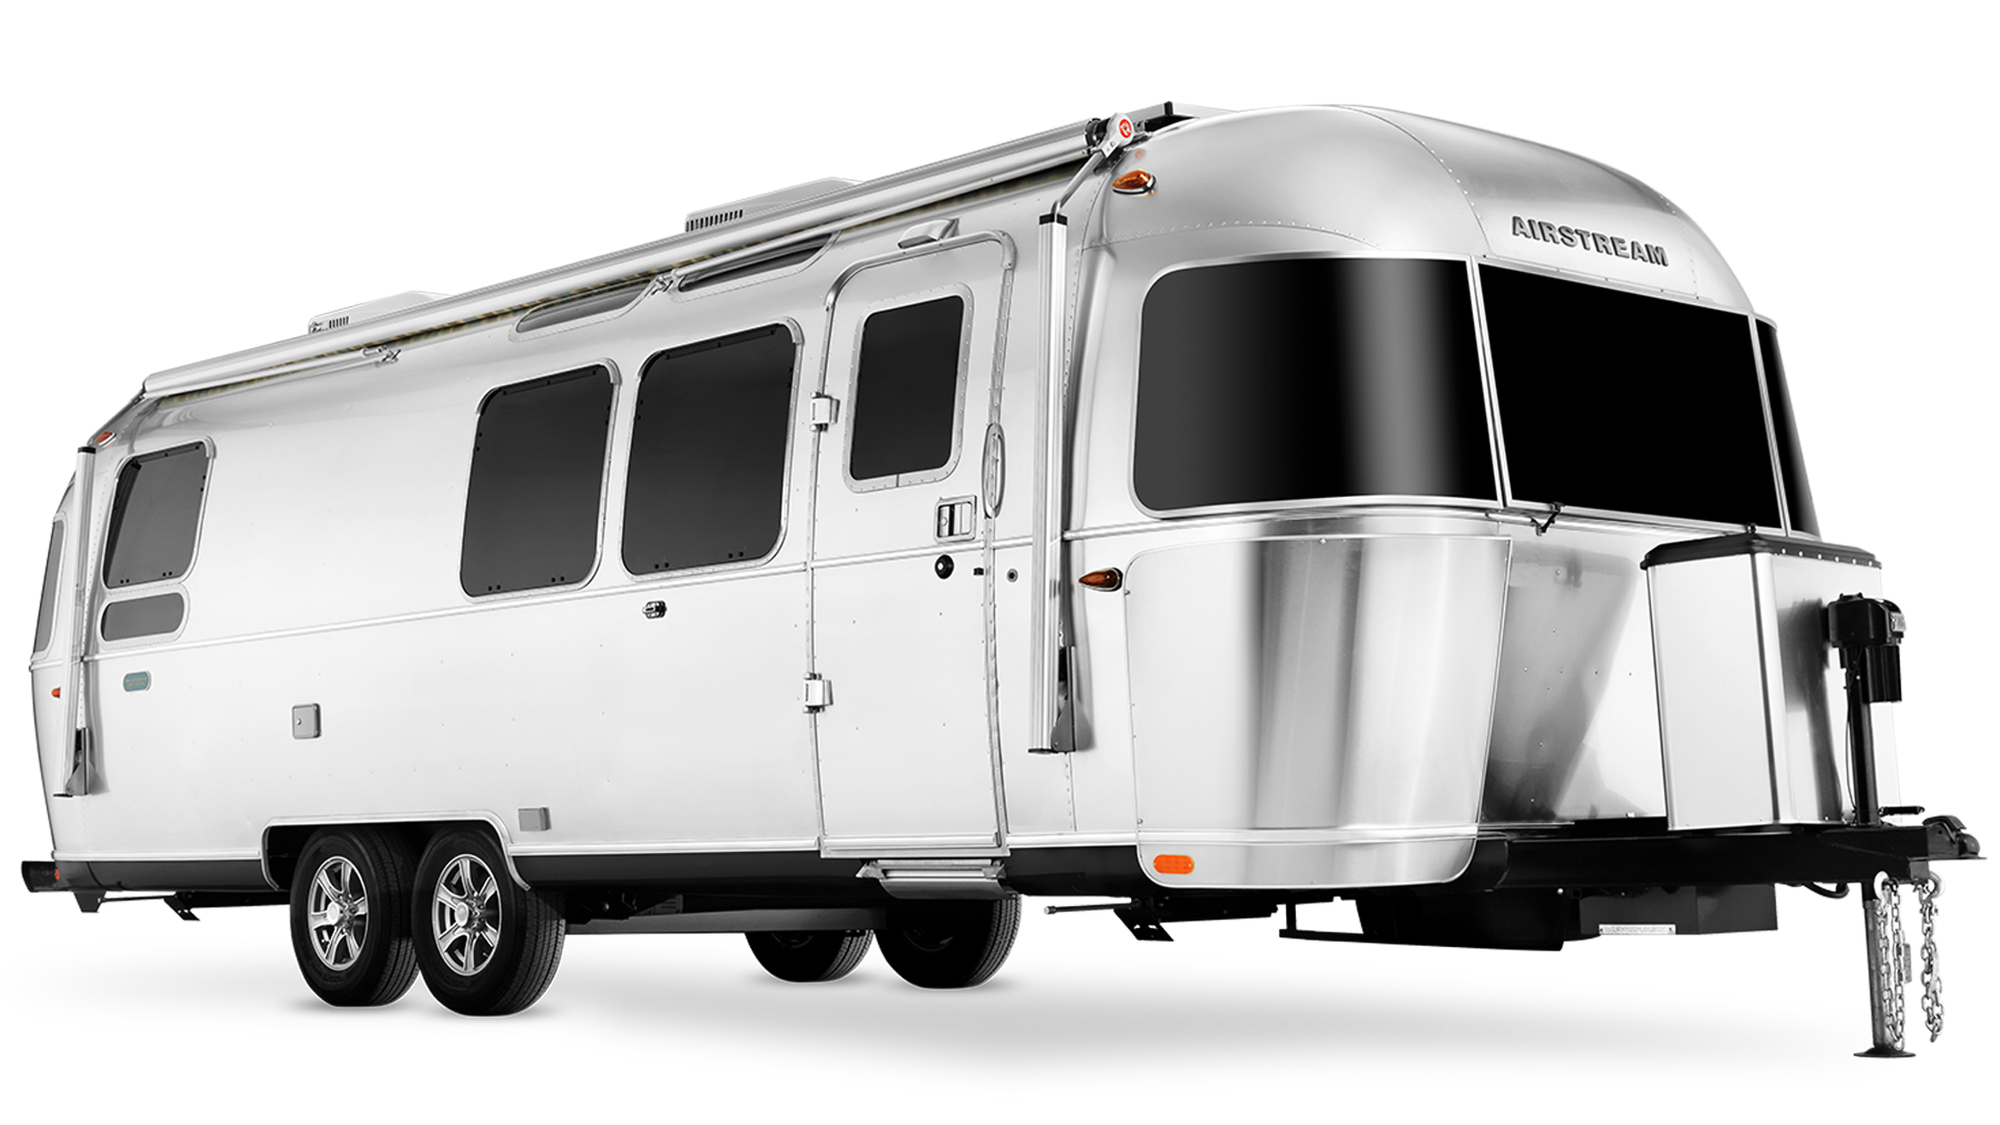 Exterior view of the new Airstream X Pottery Barn Travel Trailer.  